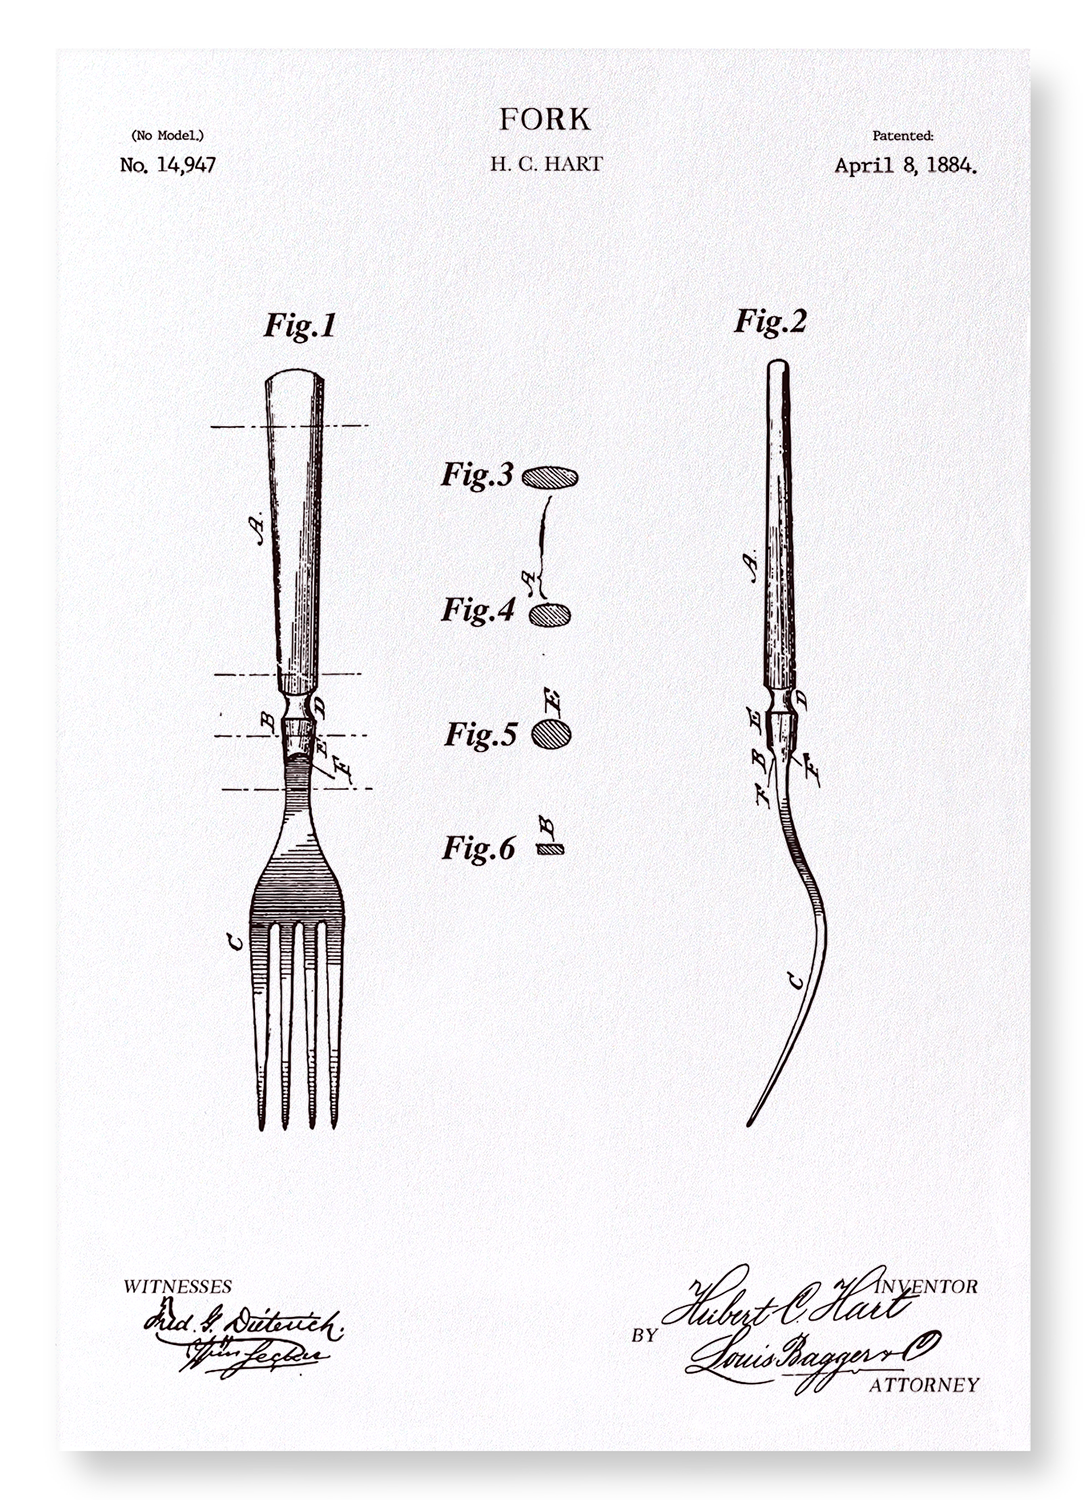 PATENT OF FORK (1884)